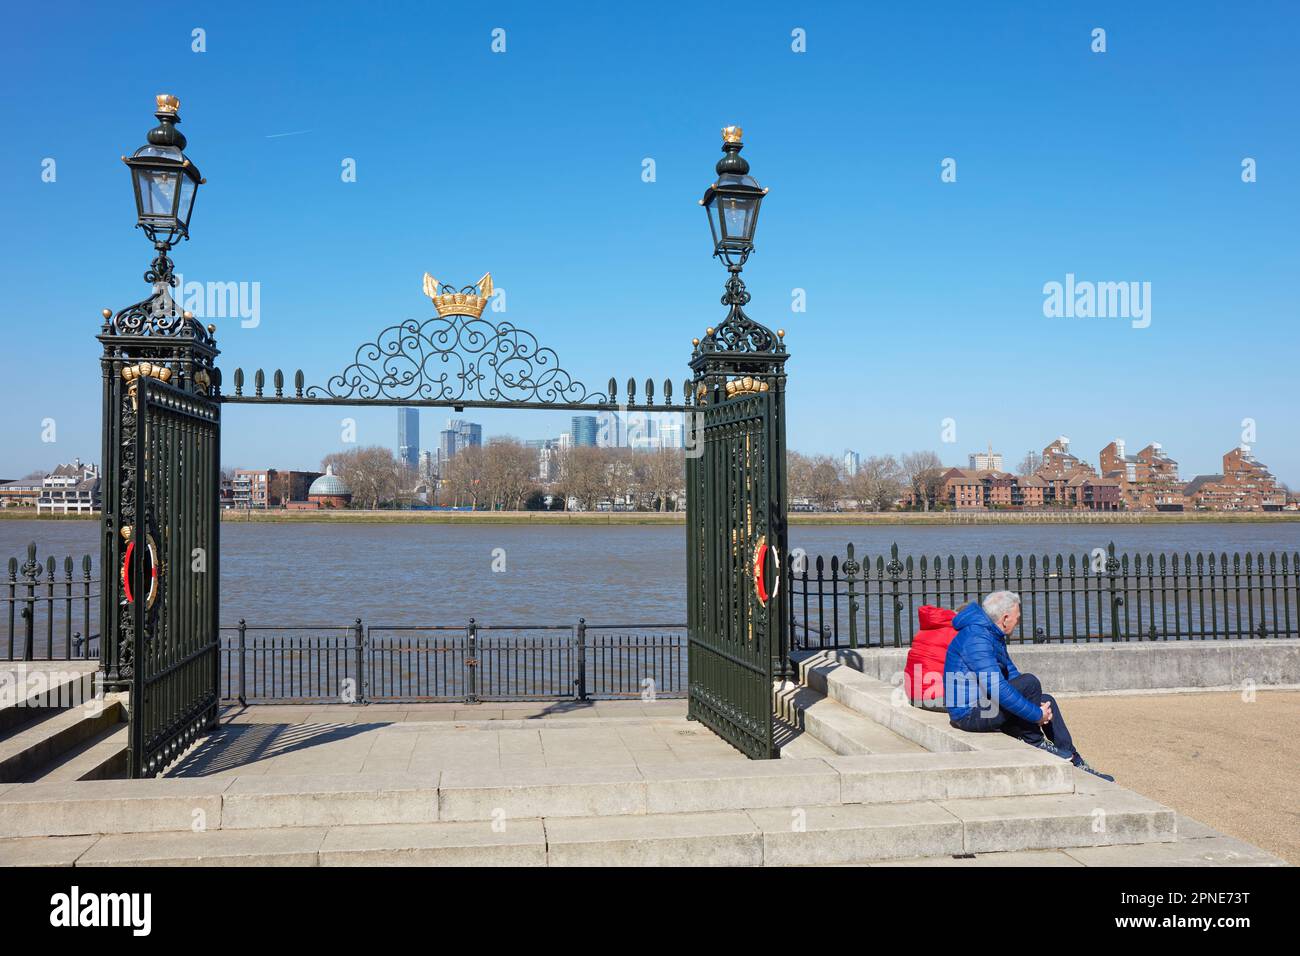 A decorated gate of the Greenwich University on the River Thames side, London, United Kingdom. Stock Photo